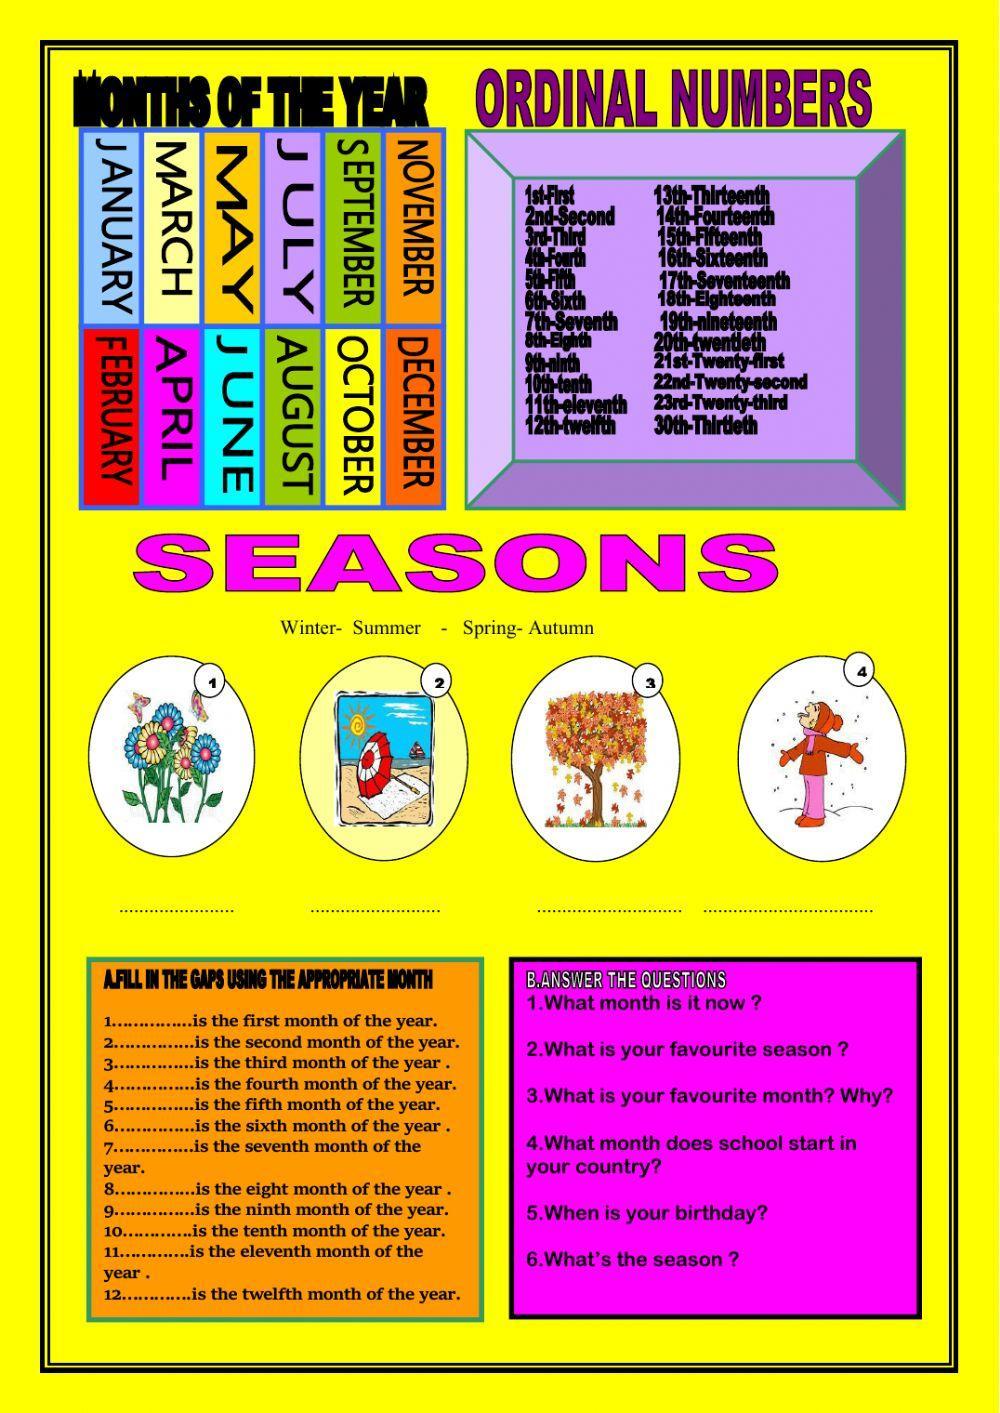 Months of the year,ordinal numbers,seasons